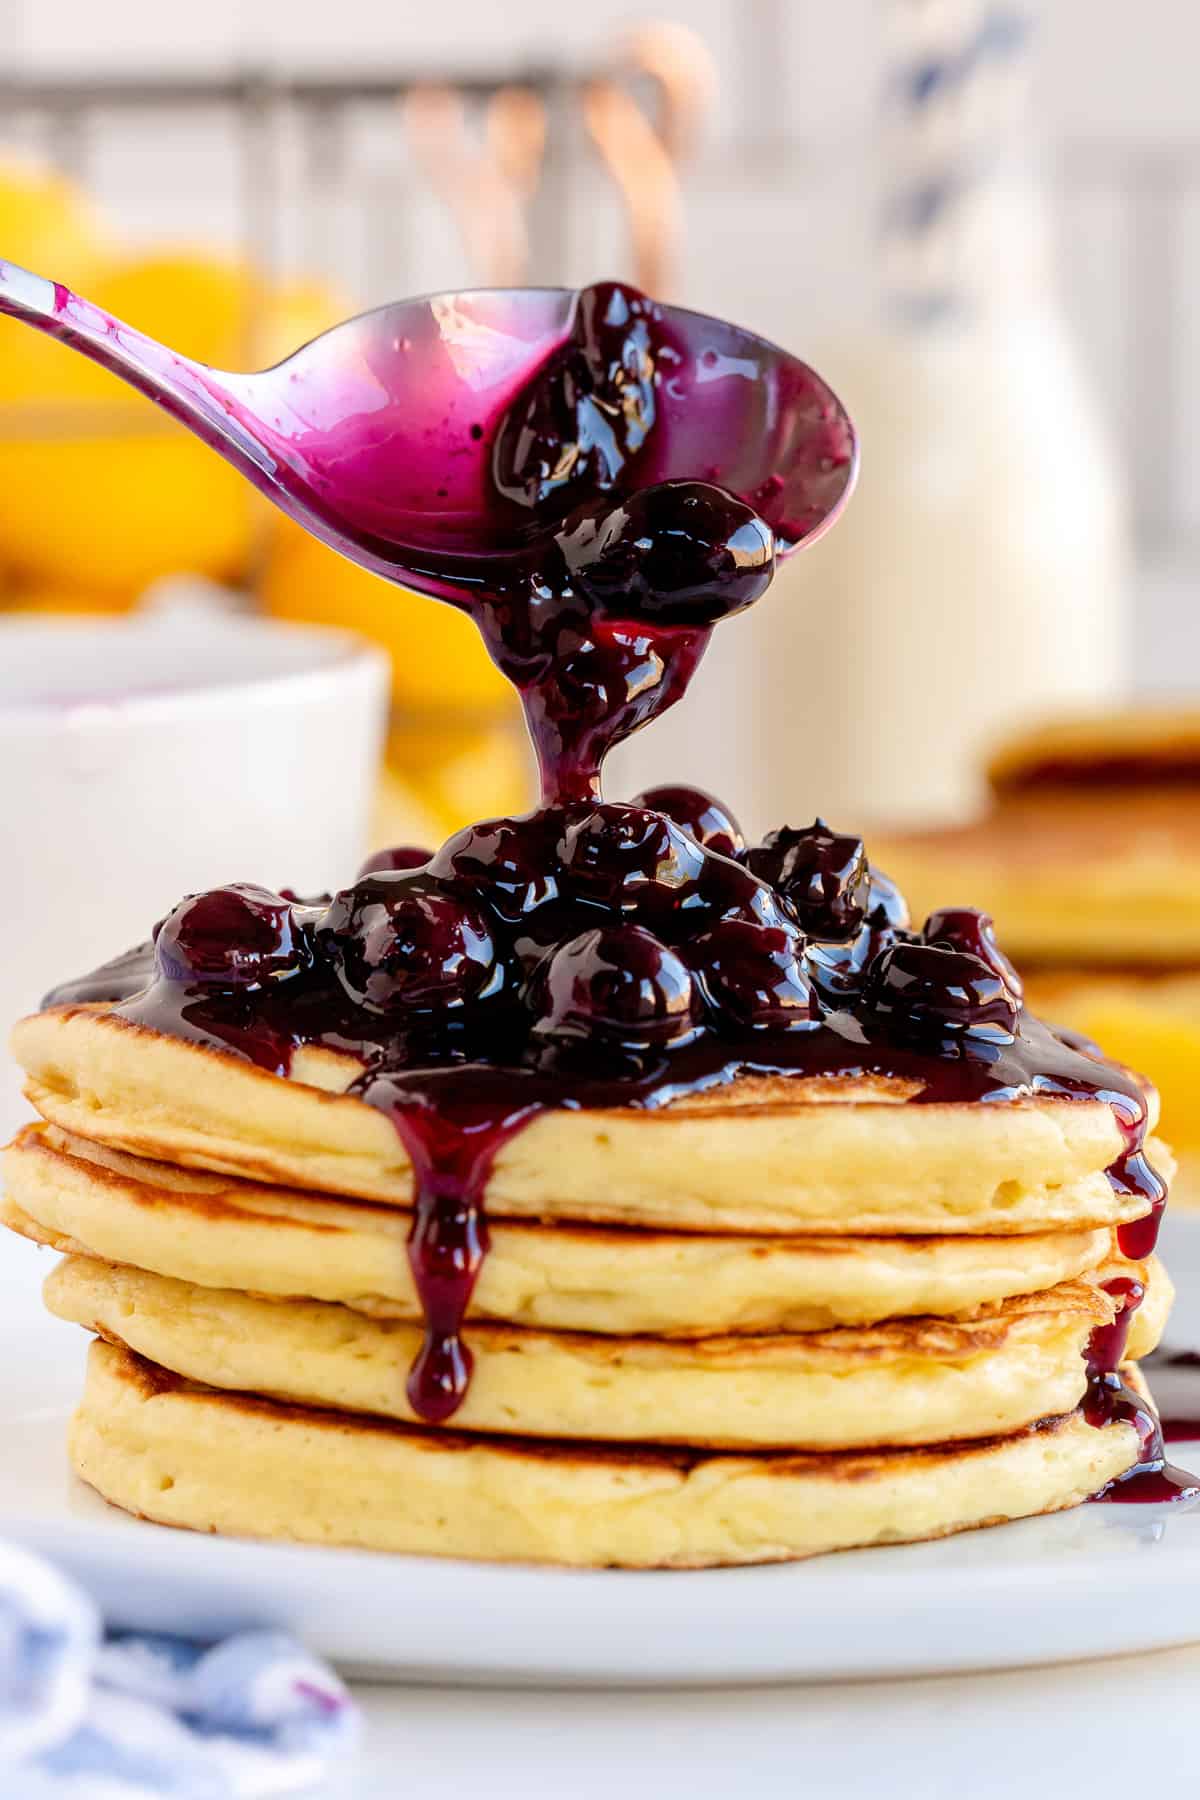 A spoon pours Blueberry Sauce over a stack of pancakes.